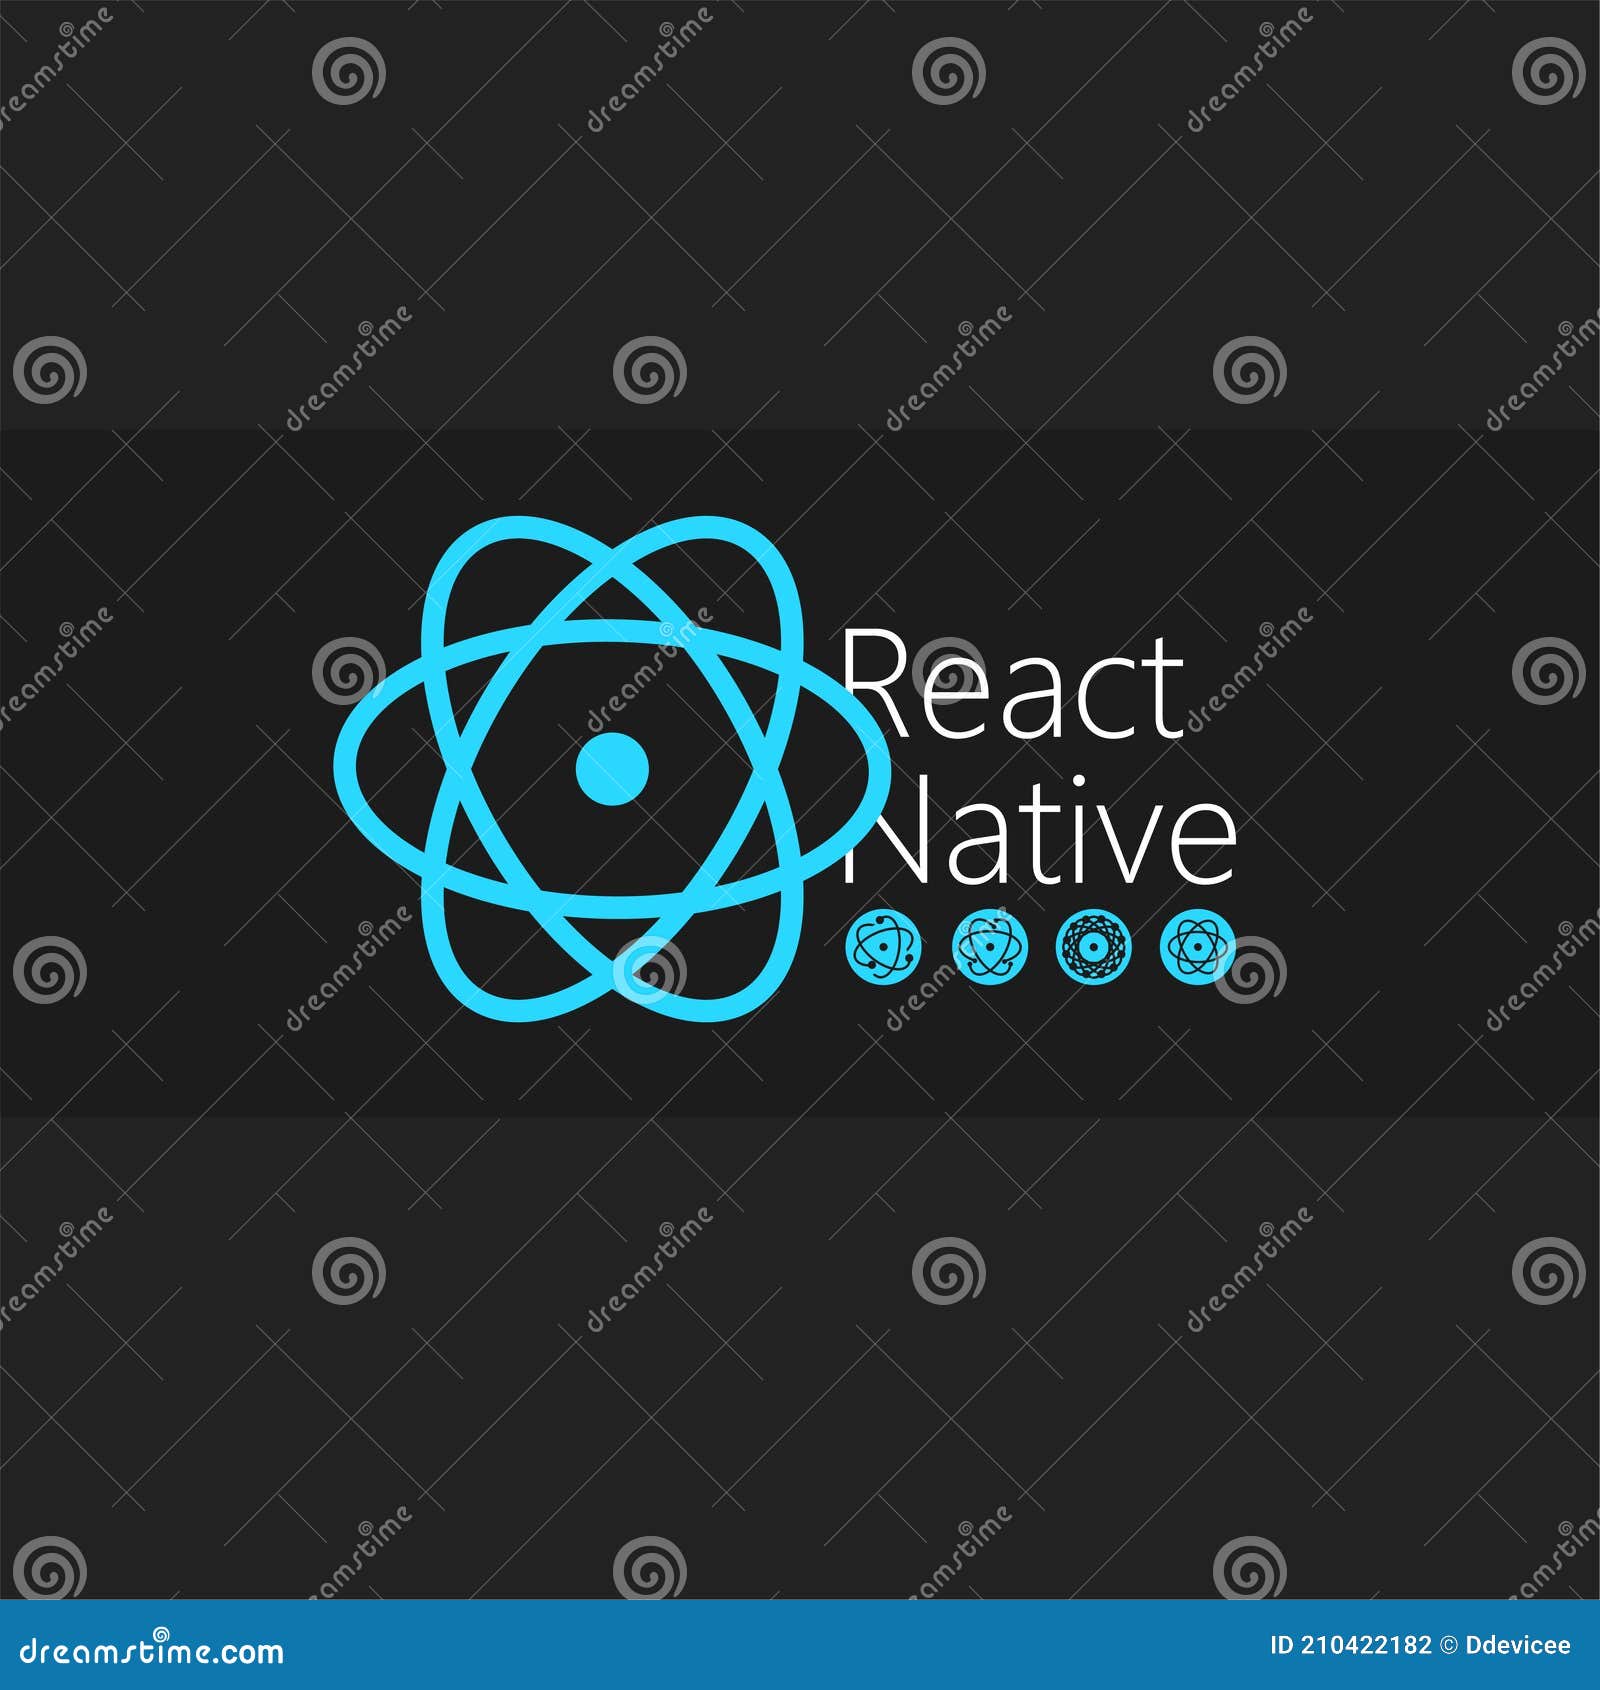 React Native Large Icons Set. Blue Vector Icons on a Black Background for  Your Arts Stock Vector - Illustration of datum, icon: 210422182